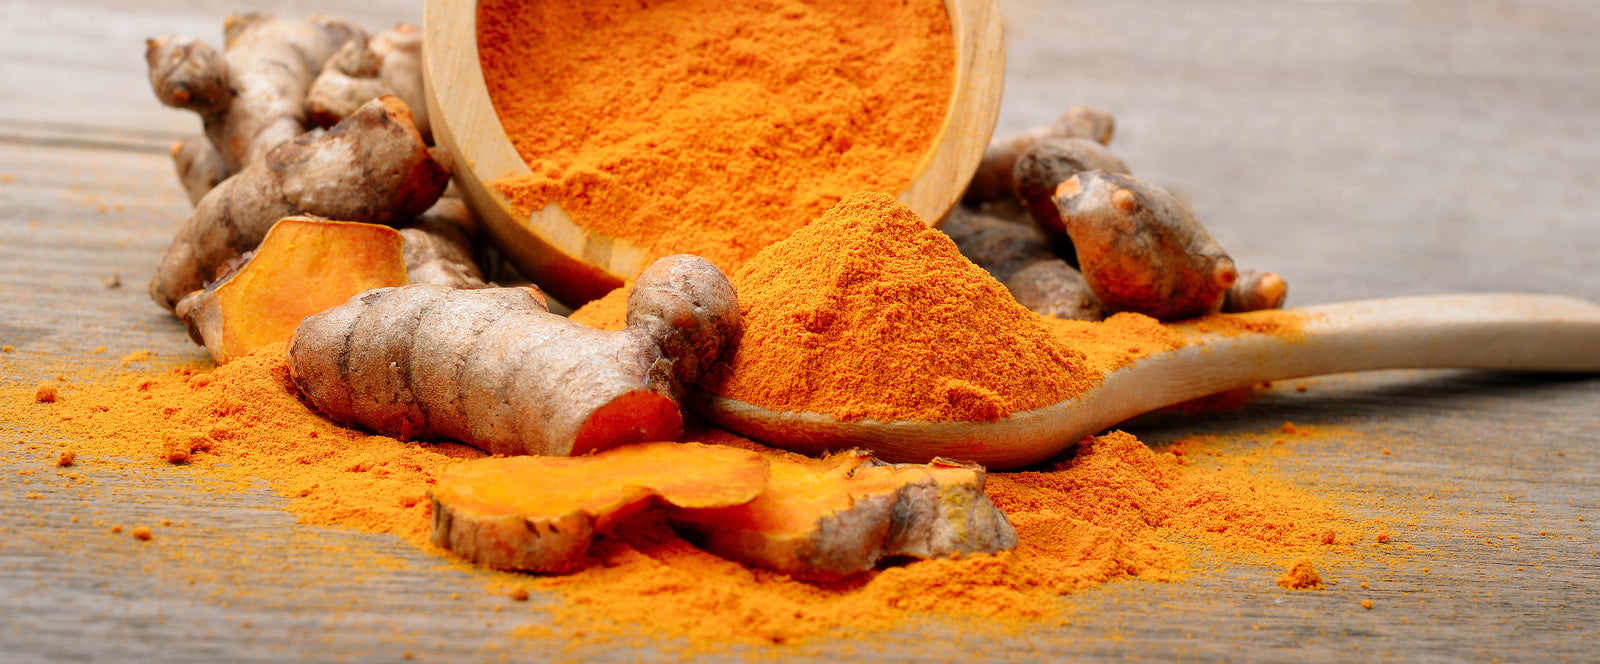 How Long Does Turmeric Take to Work?